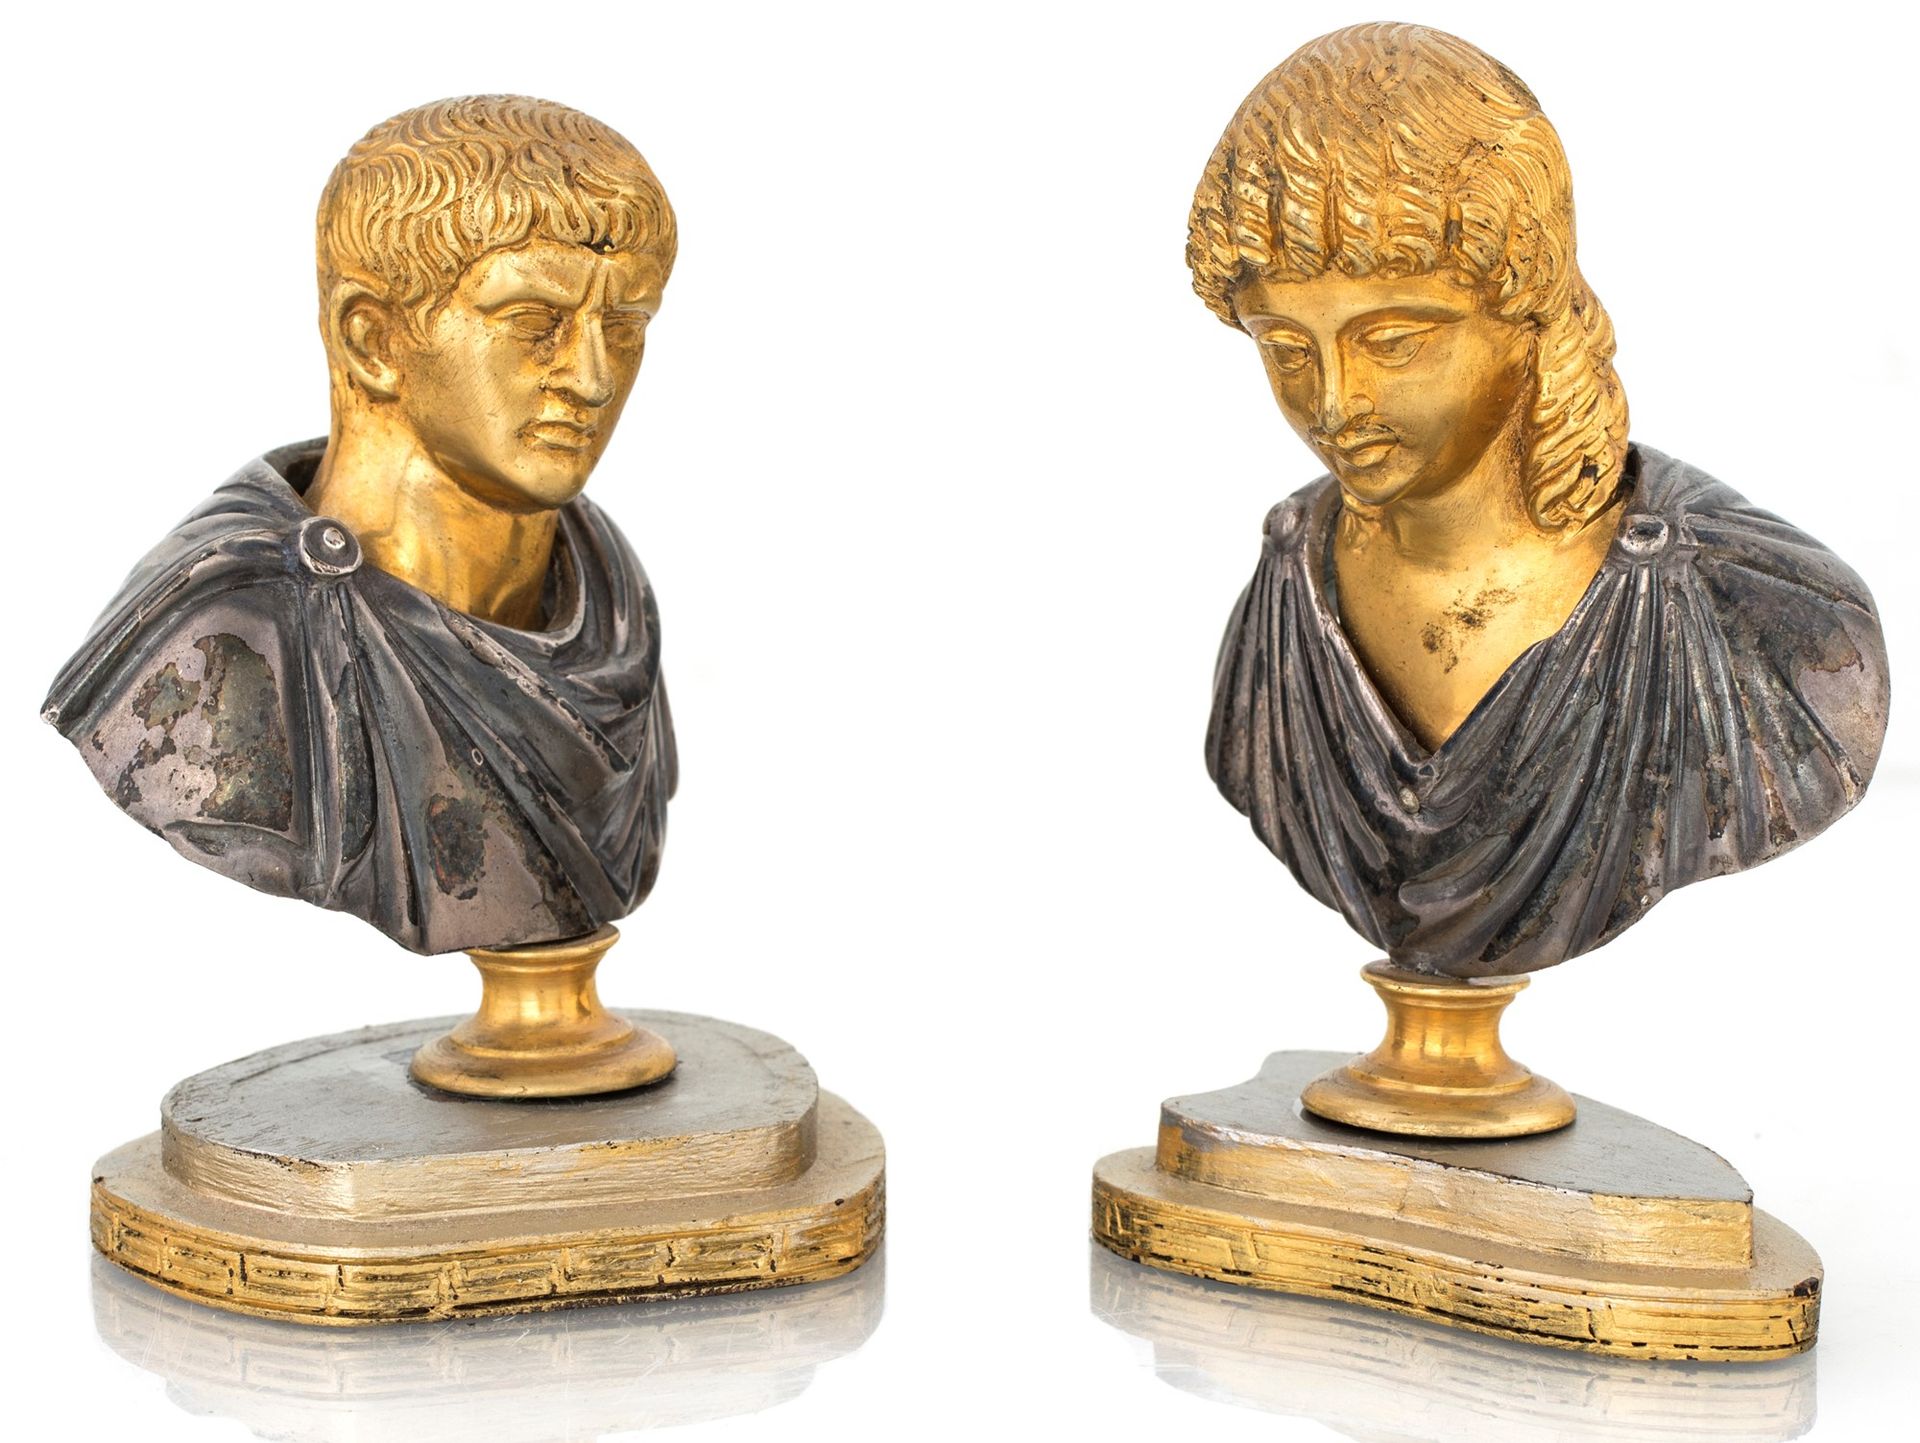 Pair of small busts in gilded and burnished bronze taken from the classical Roma&hellip;